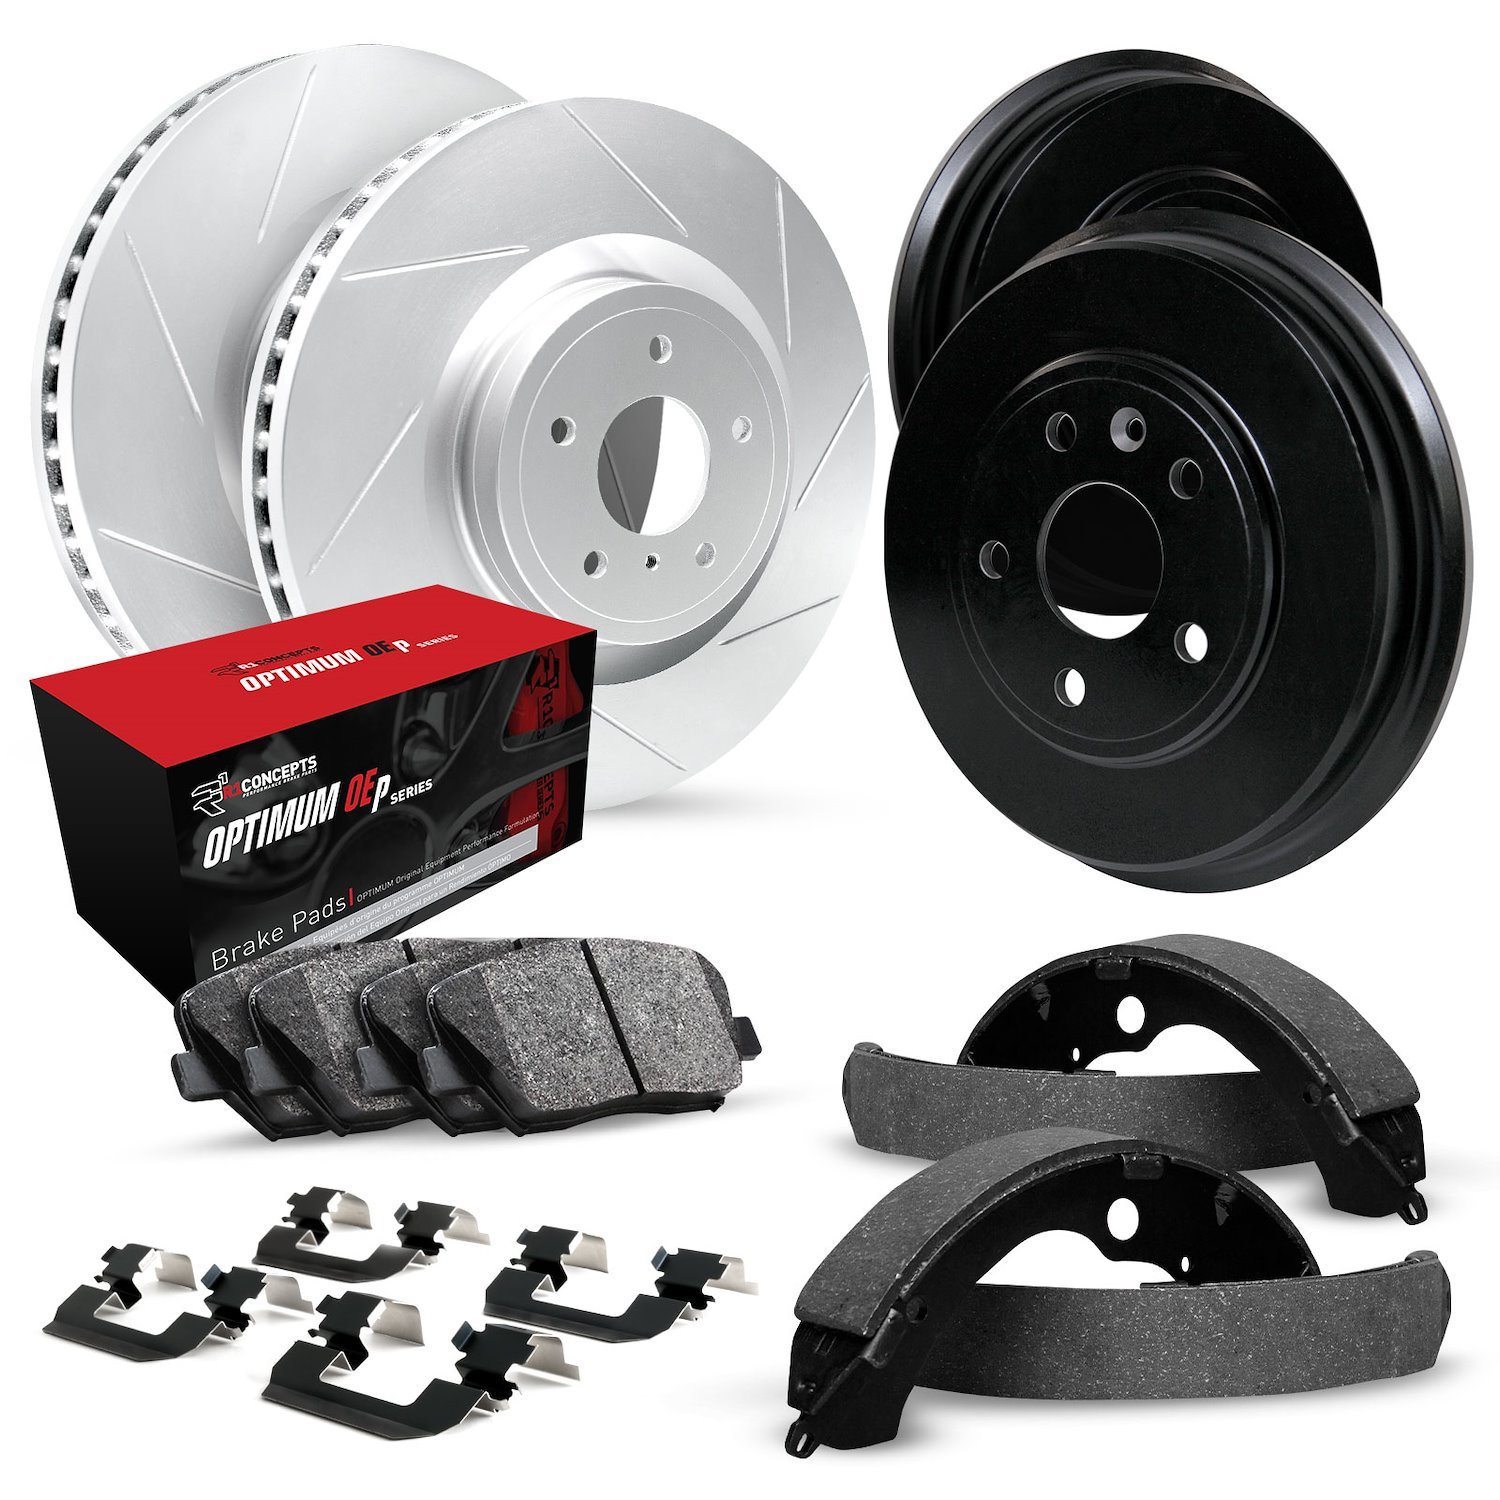 GEO-Carbon Slotted Brake Rotor & Drum Set w/Optimum OE Pads, Shoes, & Hardware, 1999-2001 Acura/Honda, Position: Front & Rear